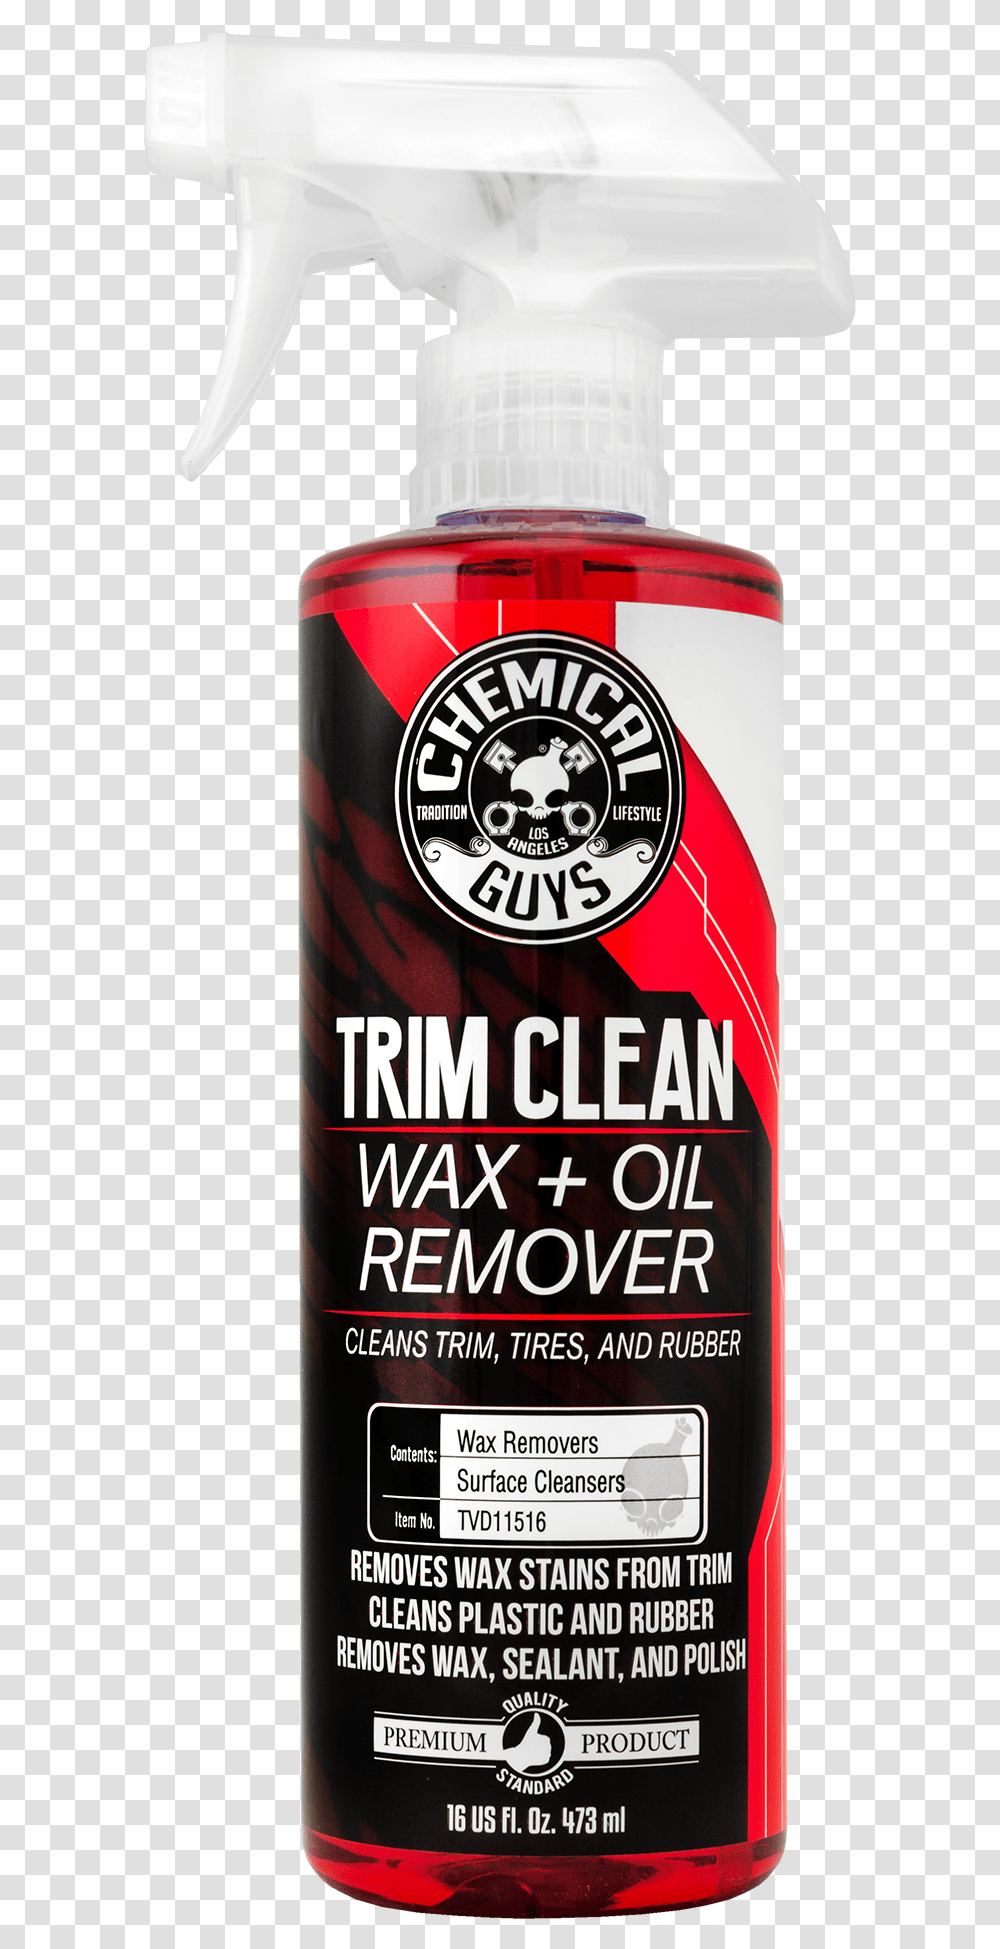 Trim Clean Wax And Oil Remover Chemical Guys Trim Clean Wax And Oil Remover, Tin, Can, Aluminium, Spray Can Transparent Png